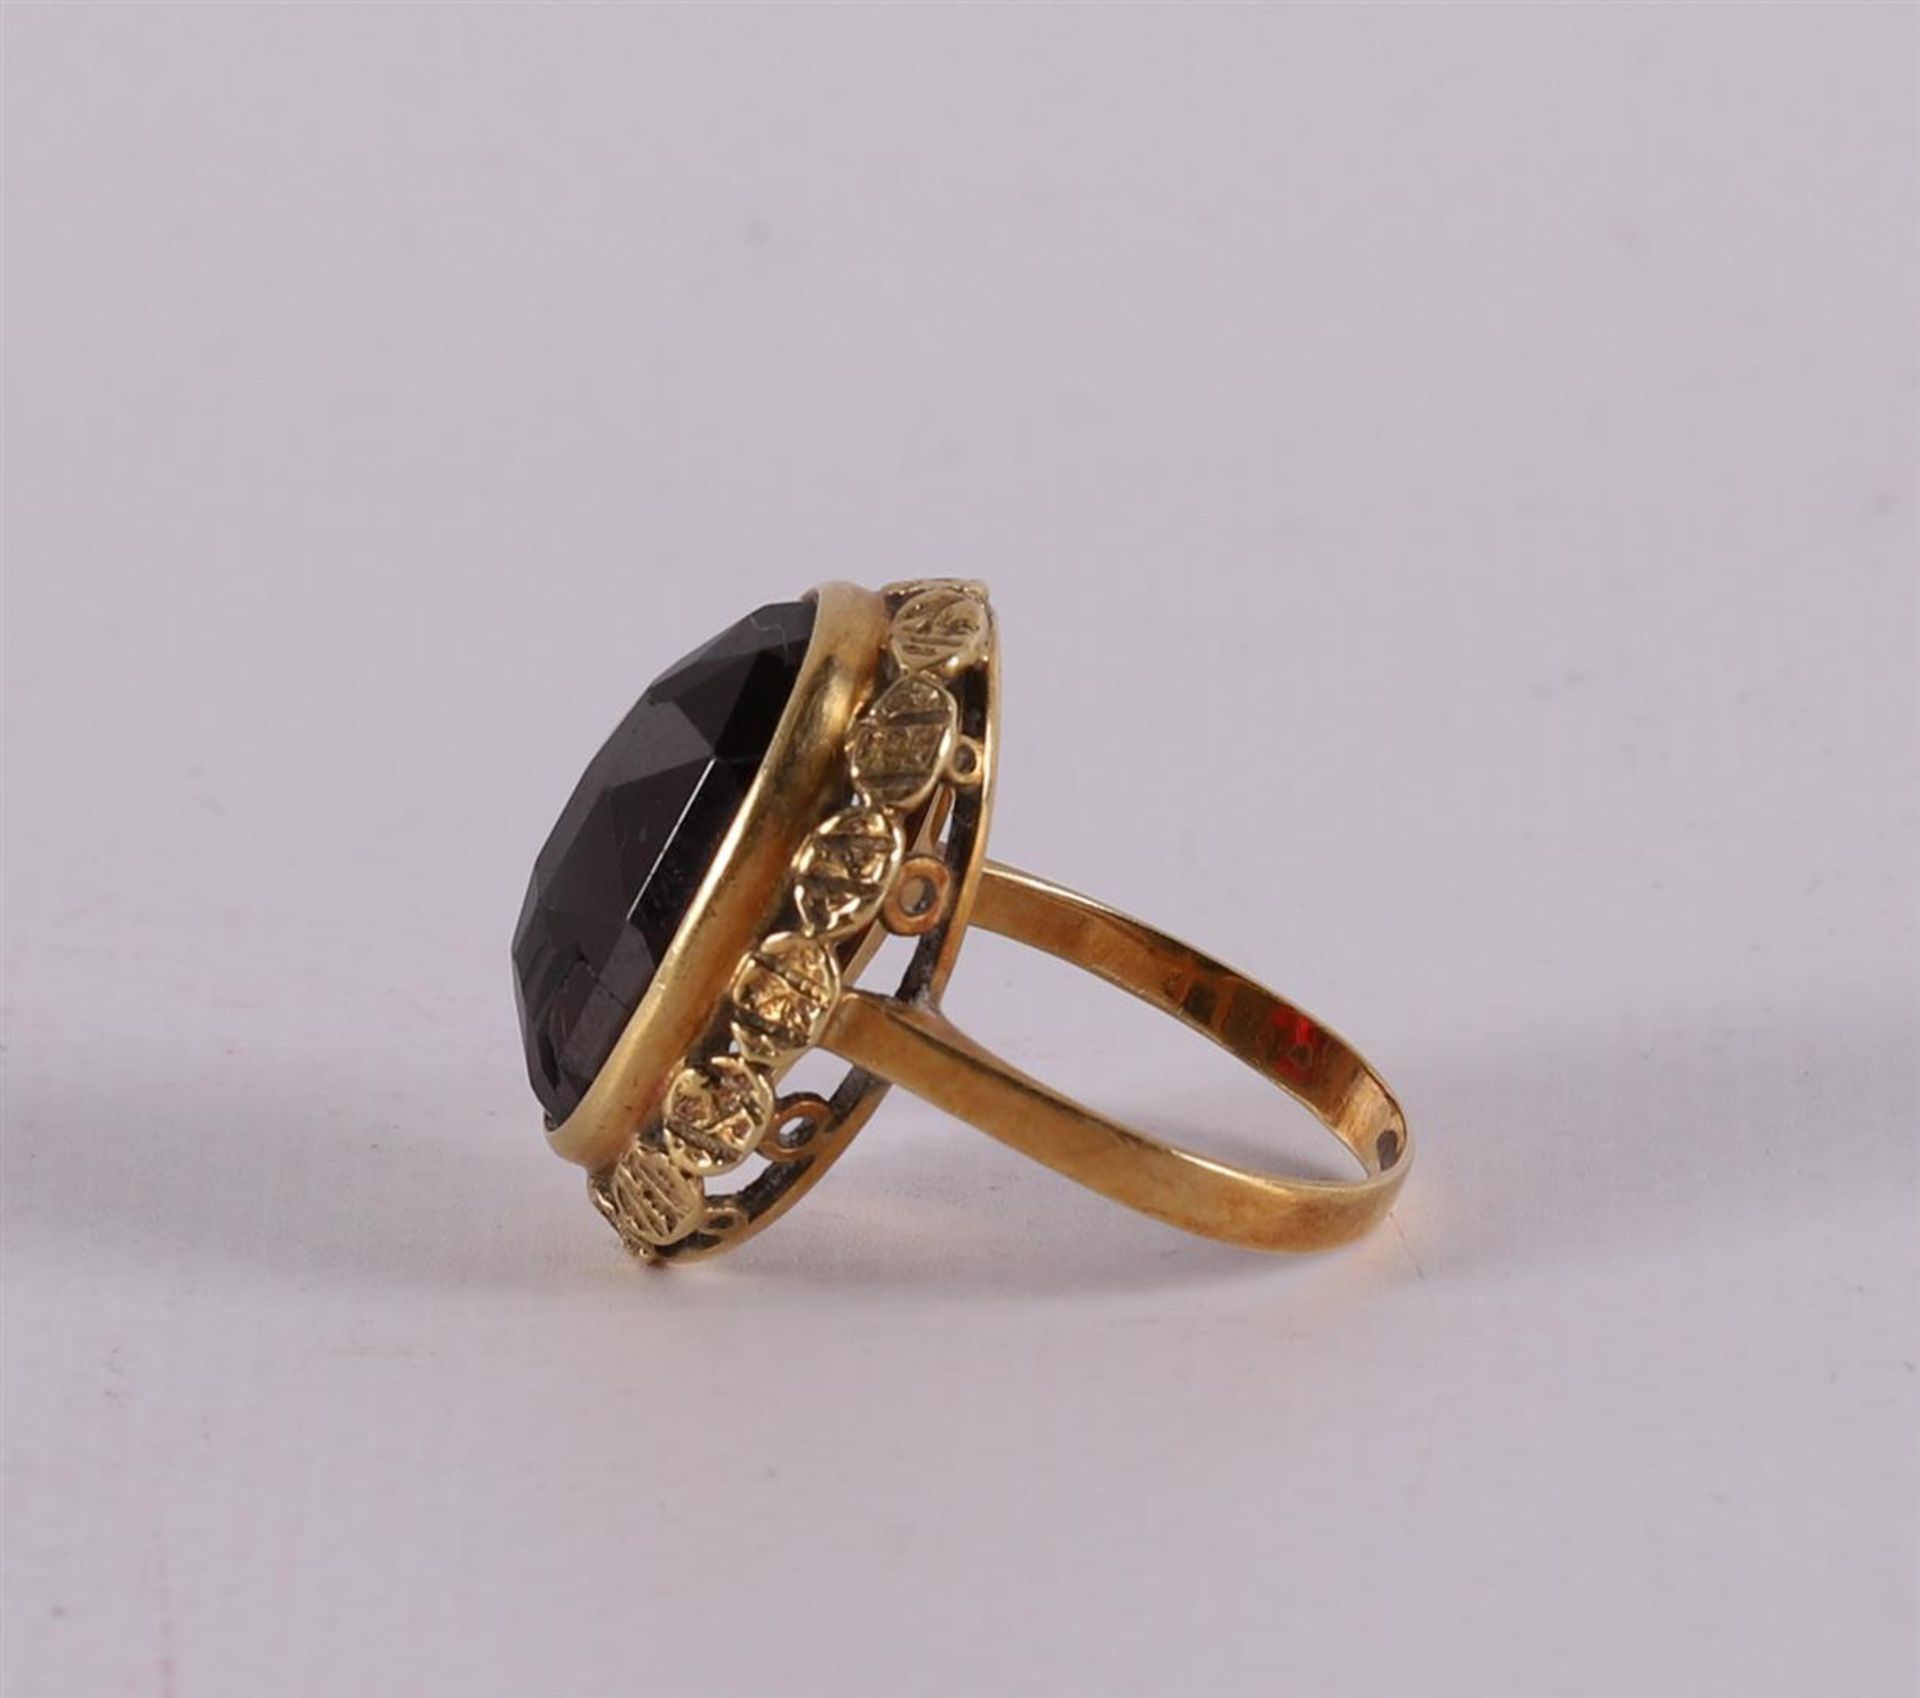 A 14 kt yellow gold ring, set with a faceted oval garnet. - Image 2 of 2